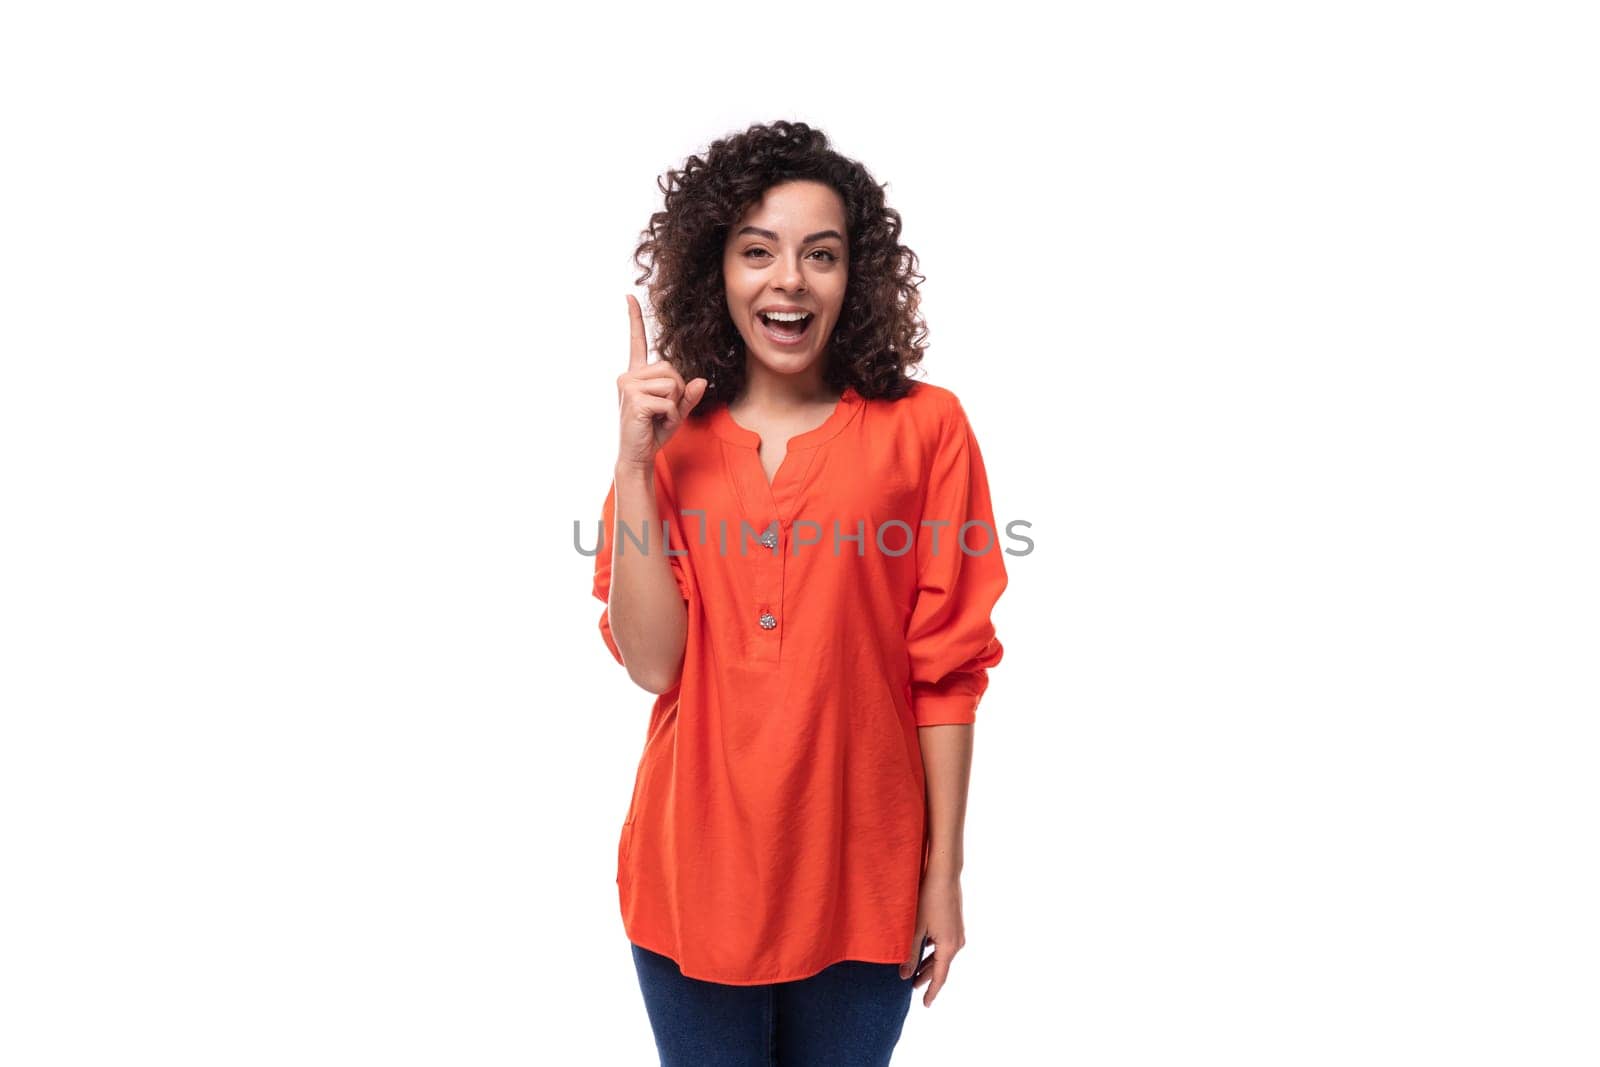 young dreamy caucasian business woman with wavy hair dressed in an orange blouse on a white background by TRMK